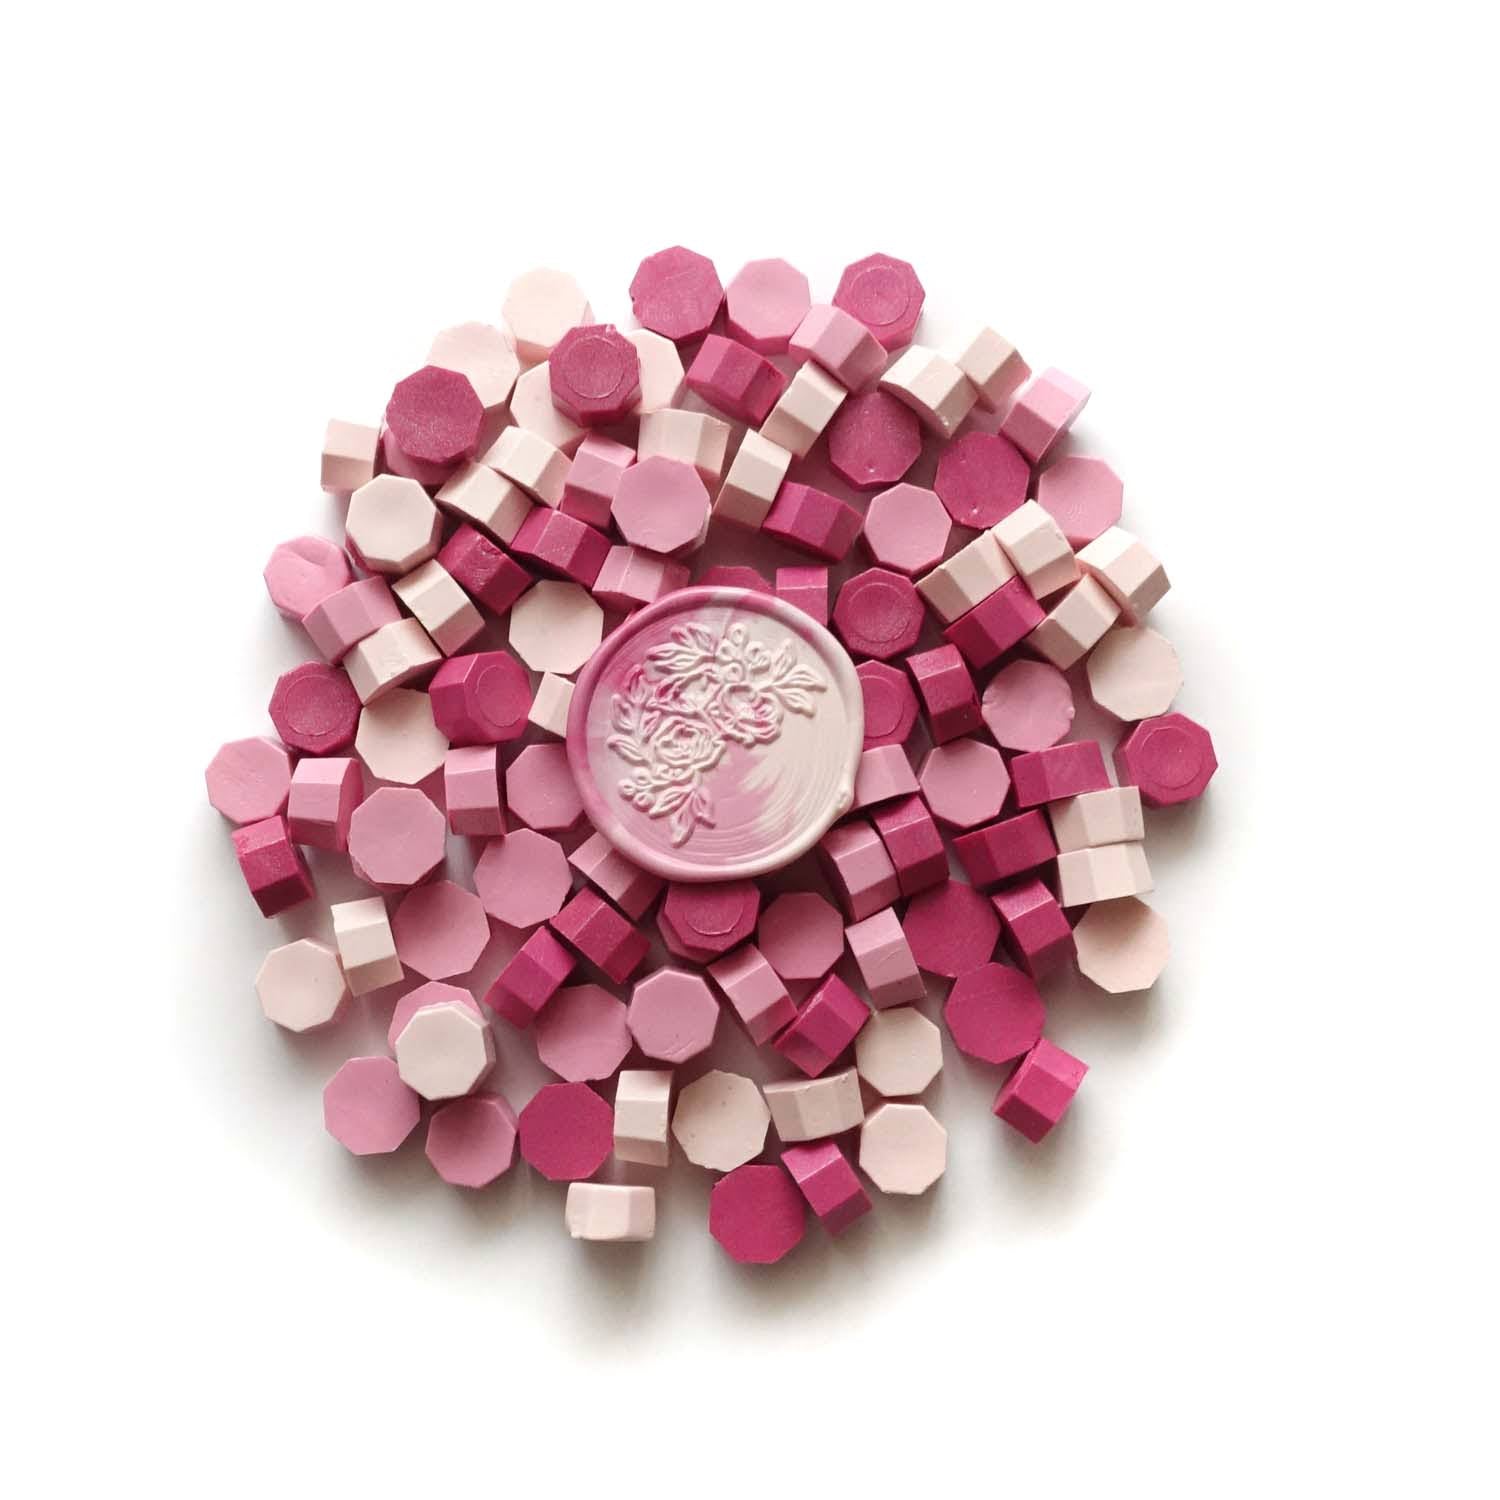 Fiona Ariva mixed cerise ballet slipper marshmallow rose pink sealing wax beads granules Melbourne Sydney Australia with floral stamp